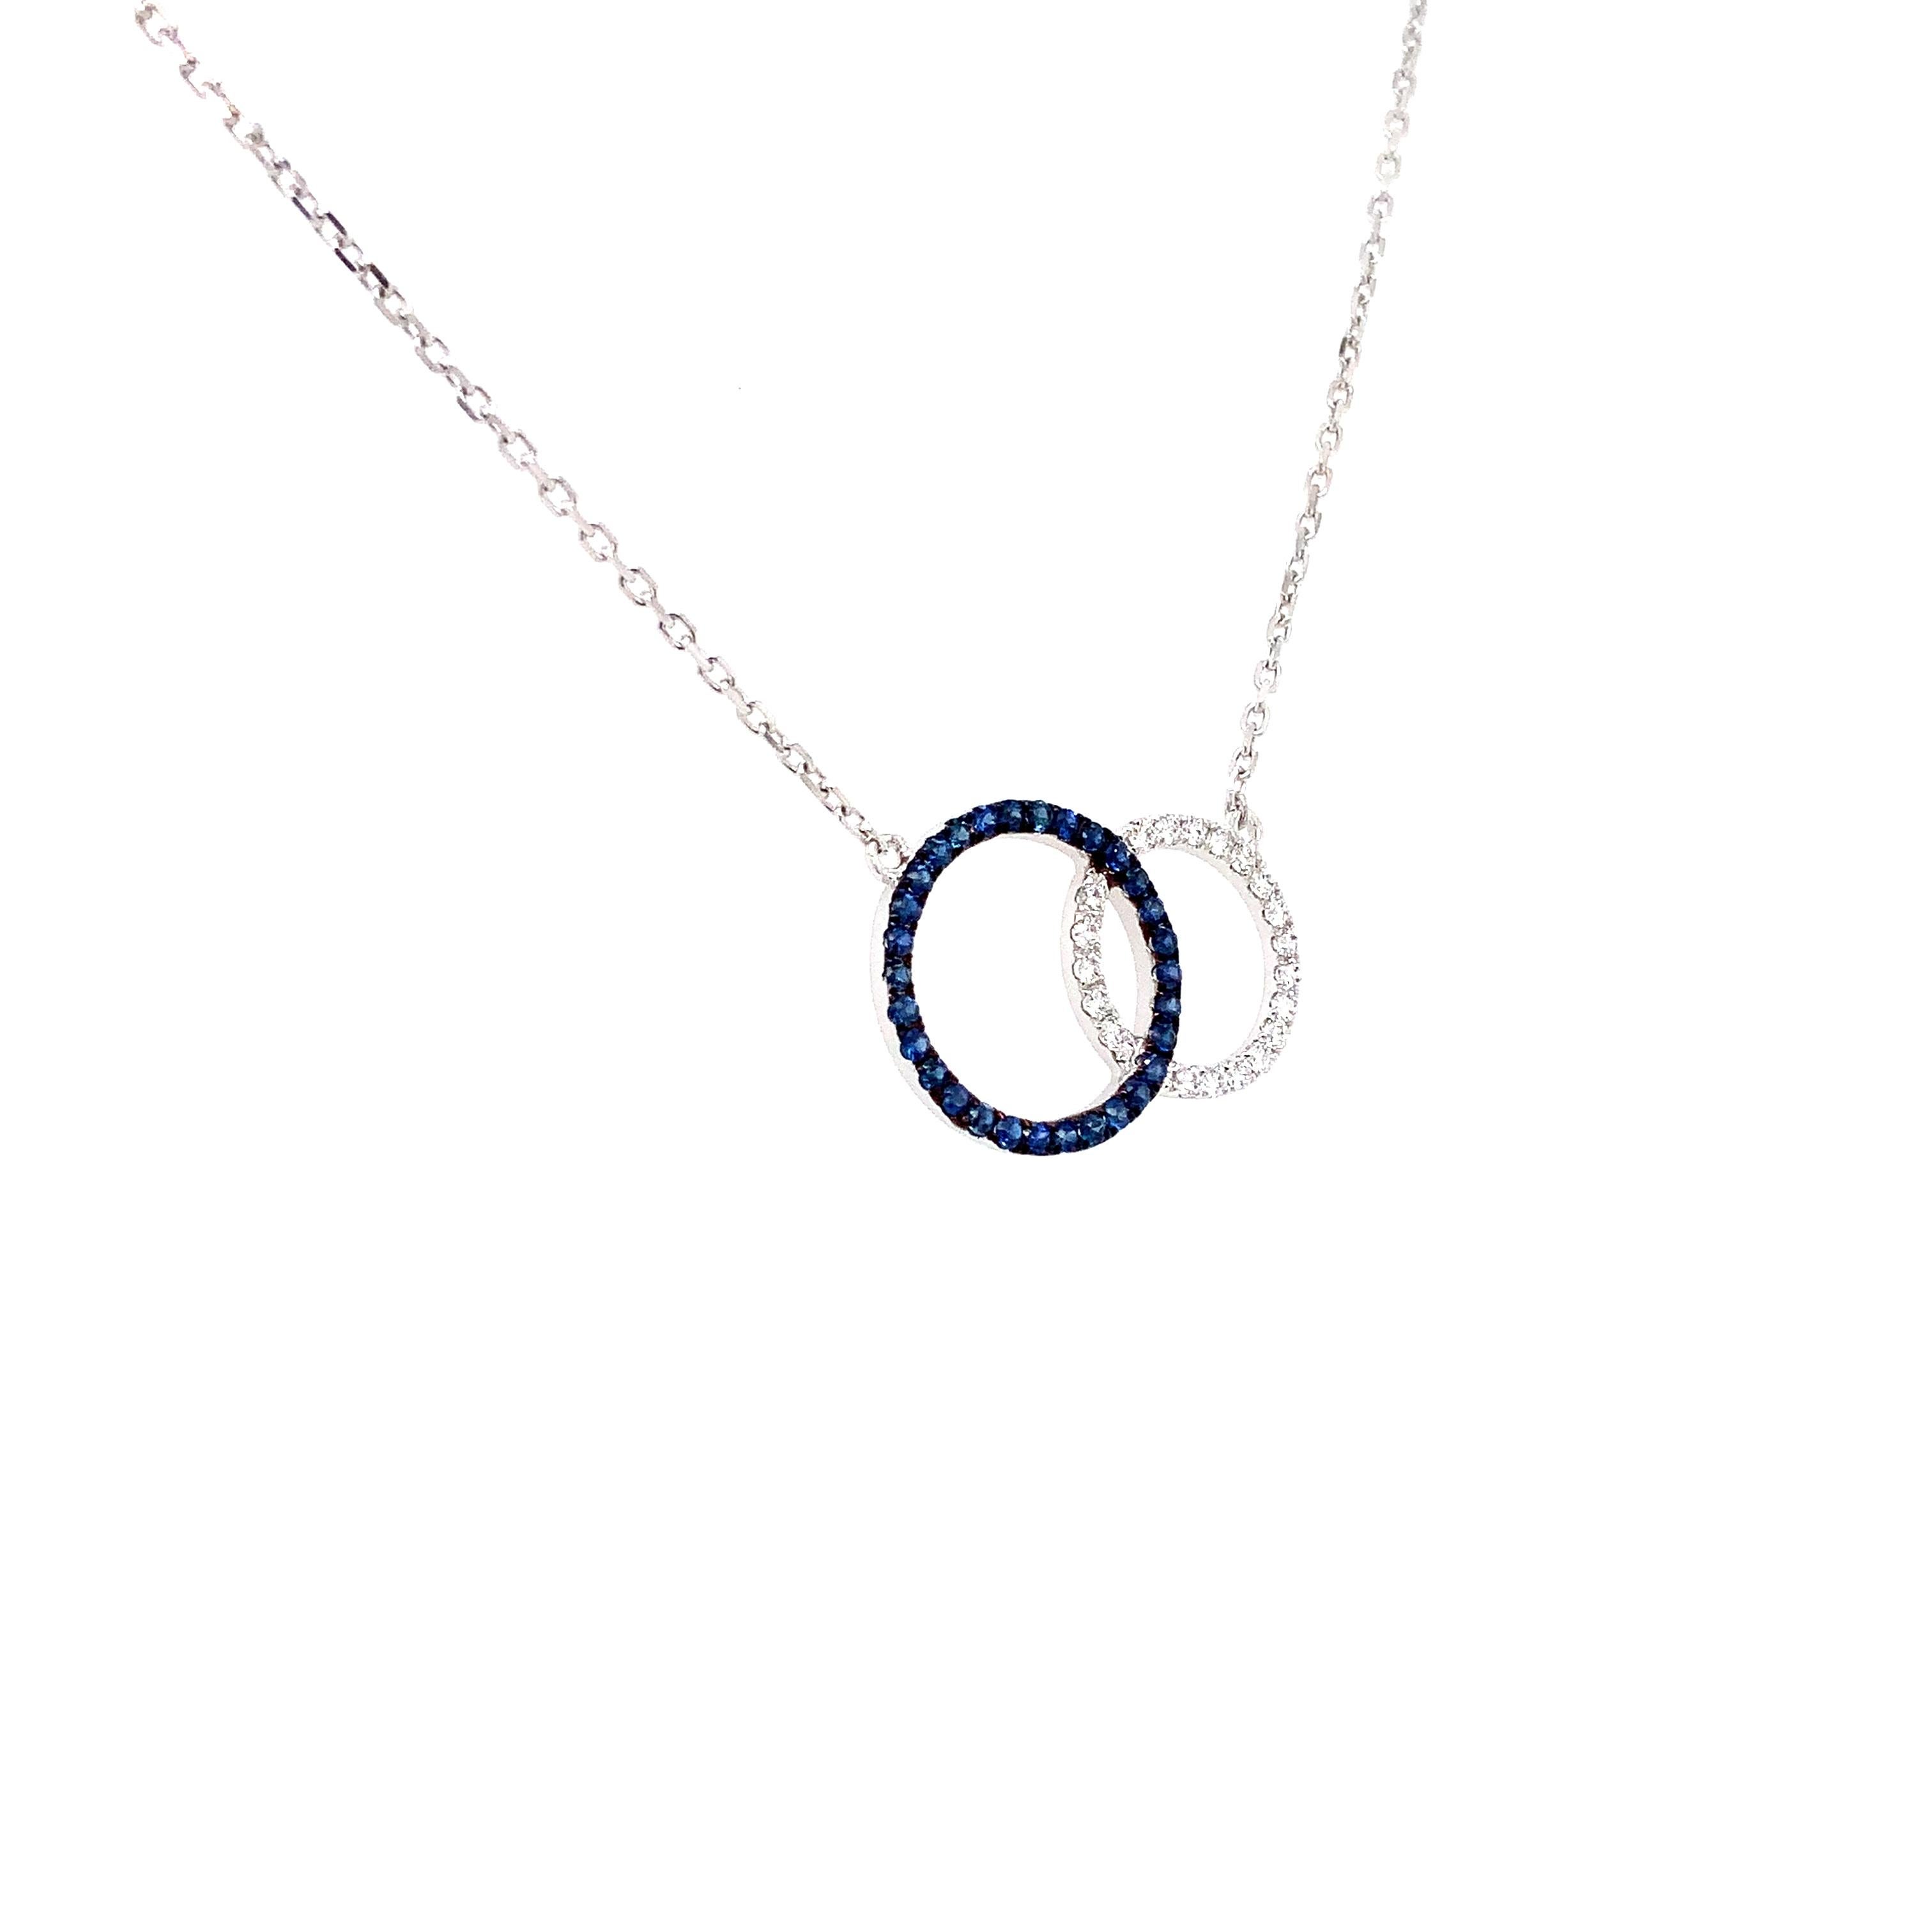 Brilliant Cut Afarin Collection Love Knot Blue Sapphire and Diamond Necklace Set in 18k White For Sale